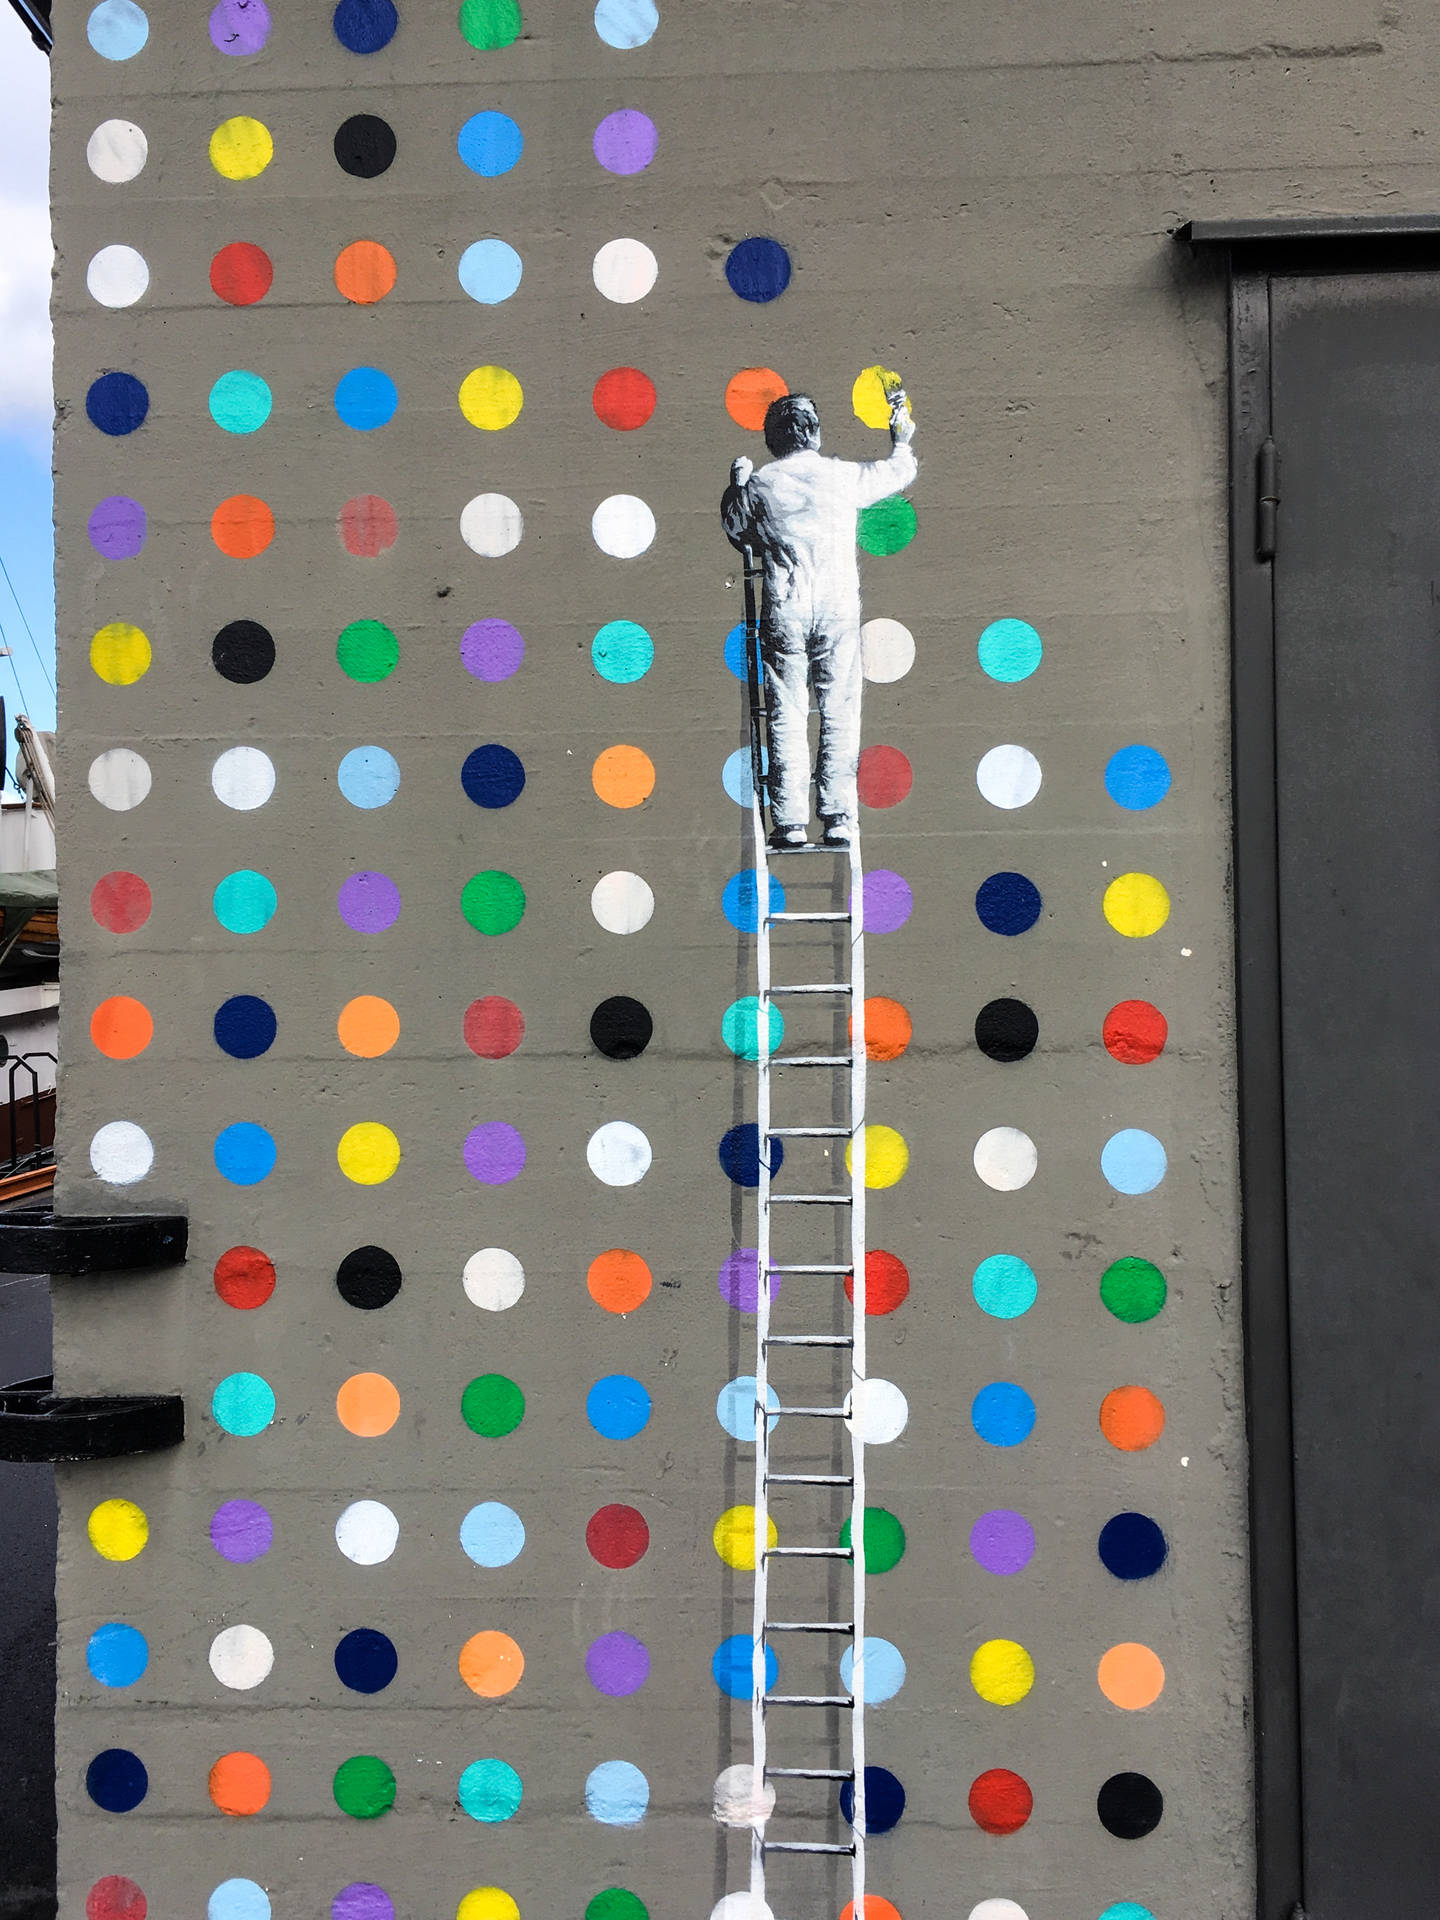 Man Colorful Dots Street Art Background